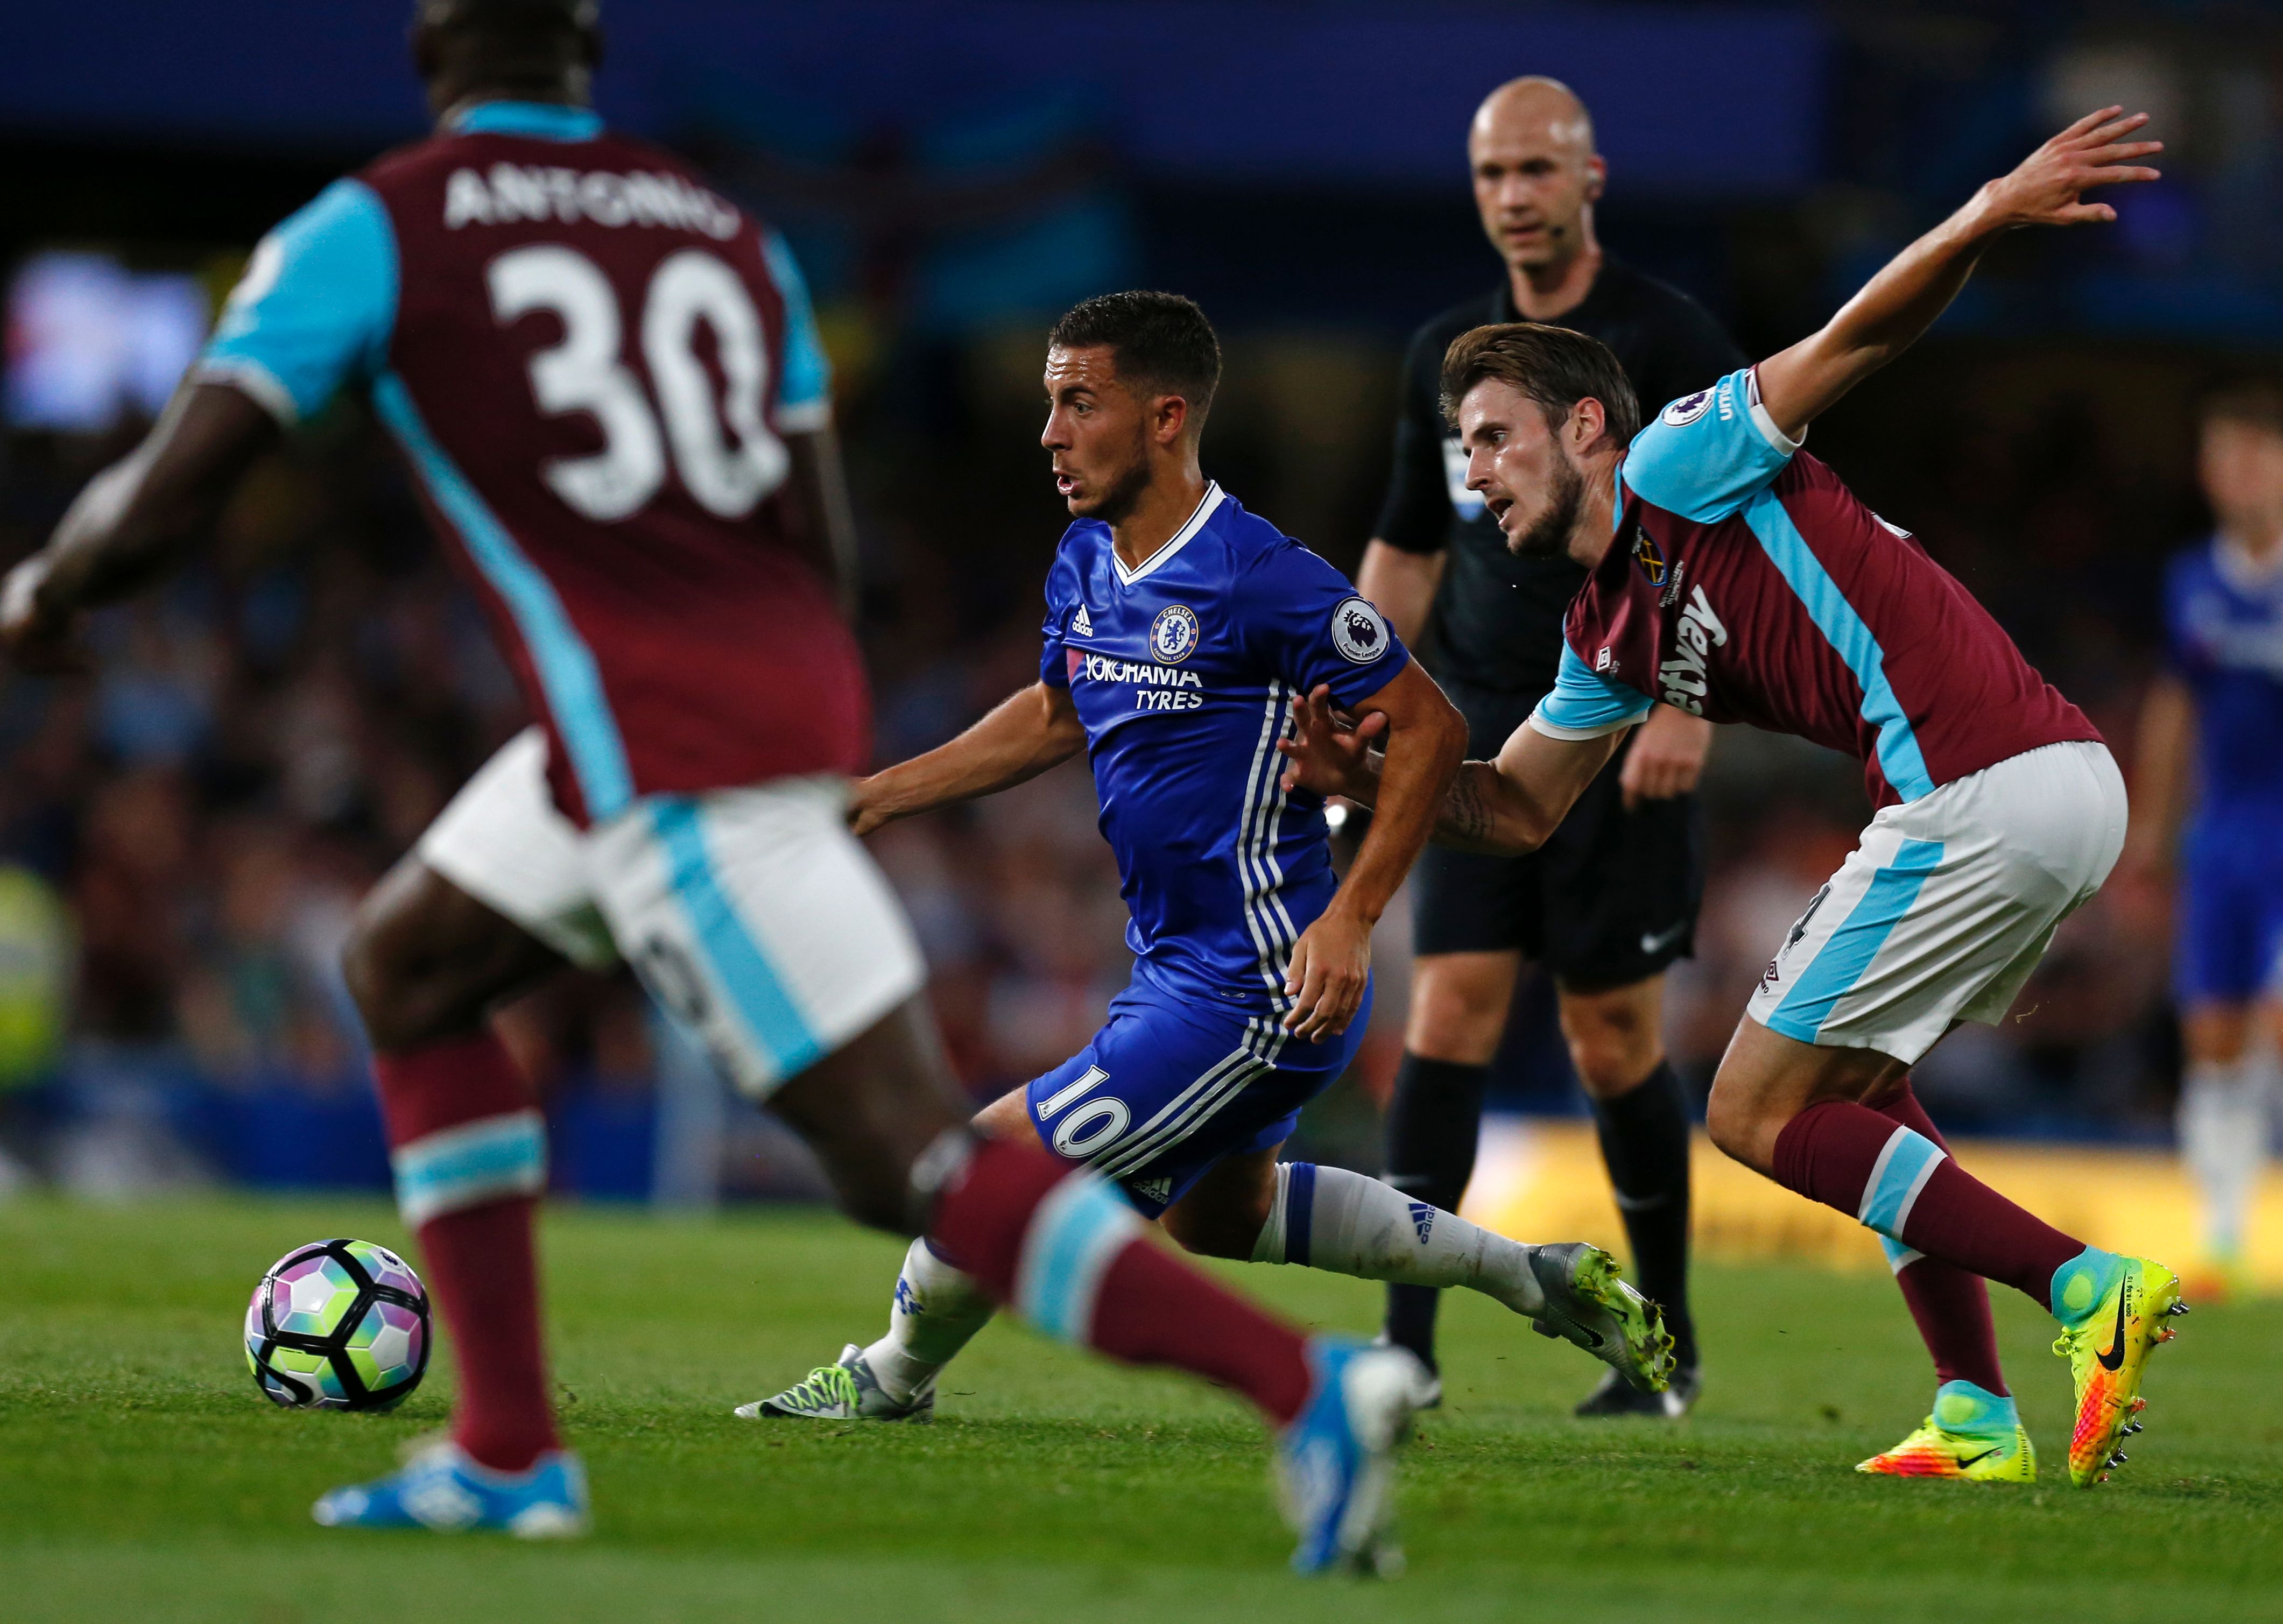 Chelsea's Belgian midfielder Eden Hazard weaves his way past West Ham United's Norwegian midfielder Havard Nordtveit (R) during the English Premier League football match between Chelsea and West Ham United at Stamford Bridge in London on August 15, 2016. / AFP / Ian KINGTON / RESTRICTED TO EDITORIAL USE. No use with unauthorized audio, video, data, fixture lists, club/league logos or 'live' services. Online in-match use limited to 75 images, no video emulation. No use in betting, games or single club/league/player publications.  /         (Photo credit should read IAN KINGTON/AFP/Getty Images)